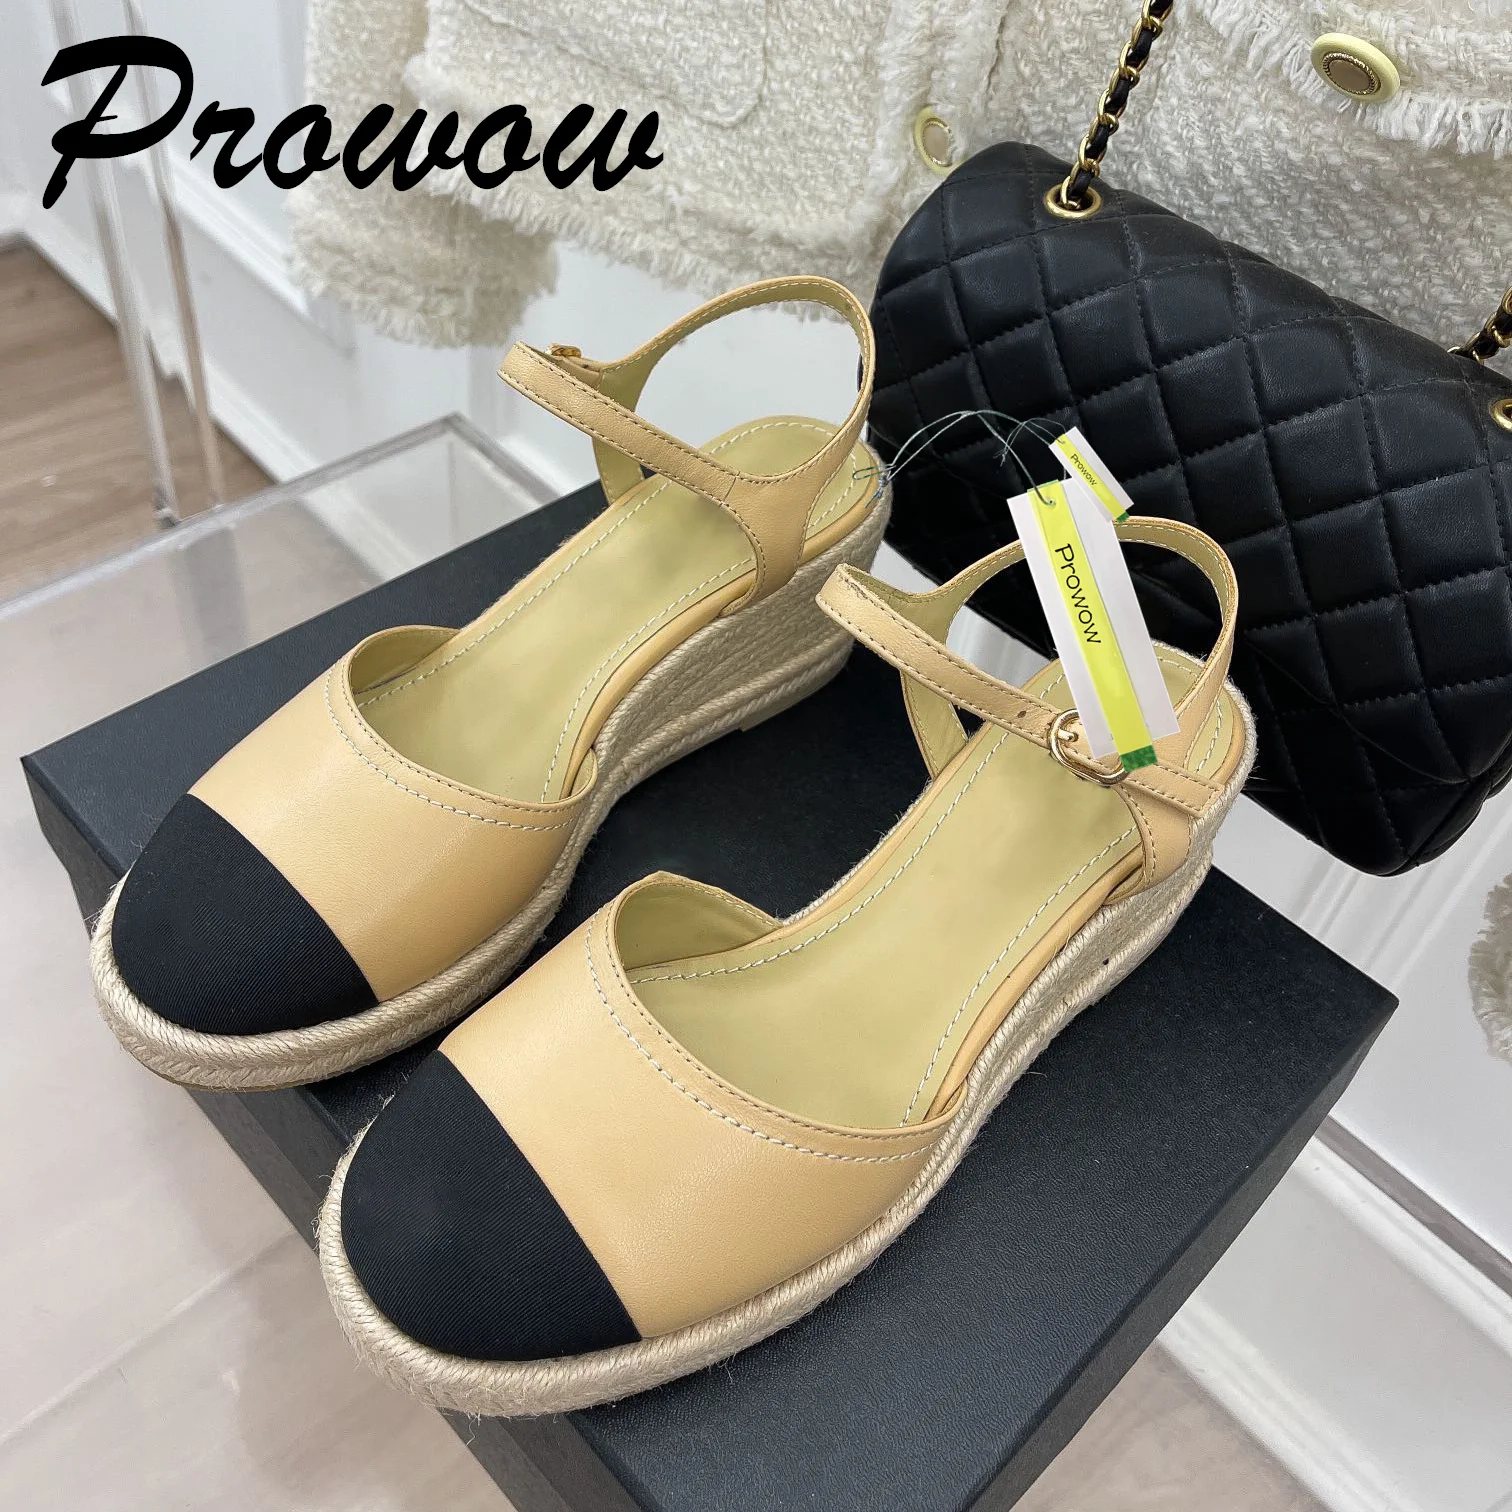 

Prowow New Quality Genuine Leather Black Beige Mary Jane Pumps Ankle Strap HIgh Heels Wedges Sandals Spring Summer Zapatos Mujer